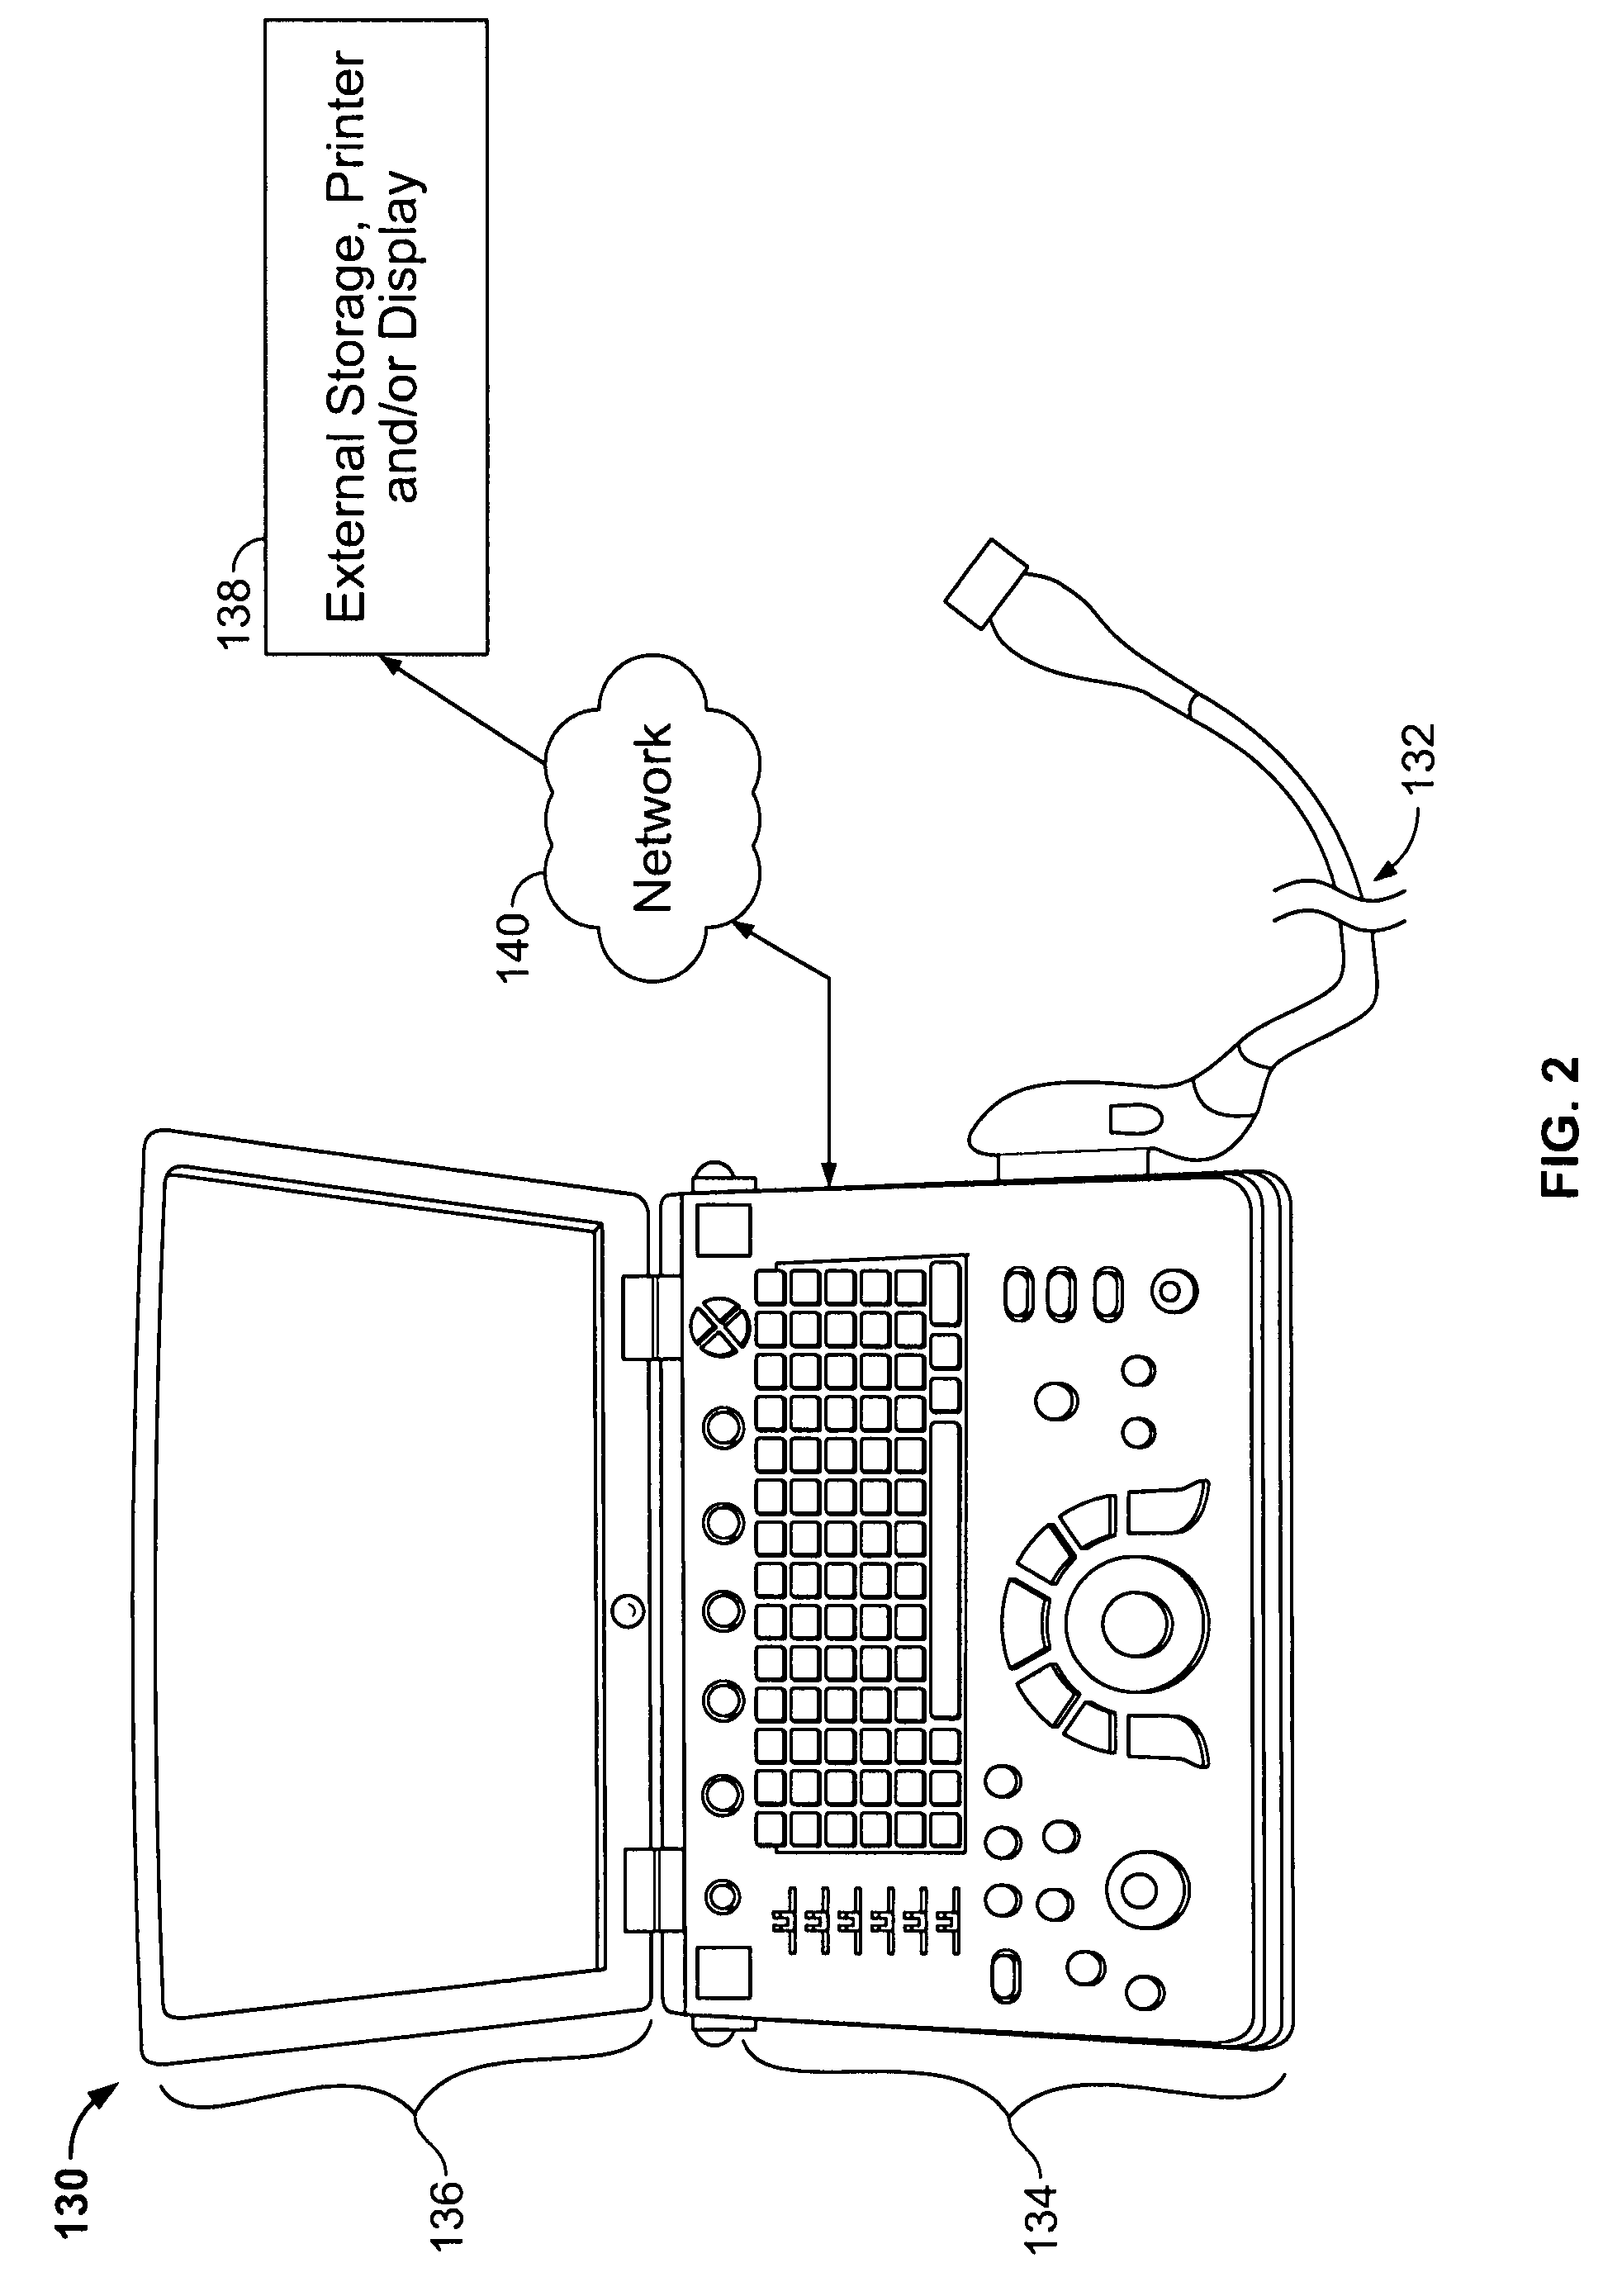 Method for optimized dematching layer assembly in an ultrasound transducer